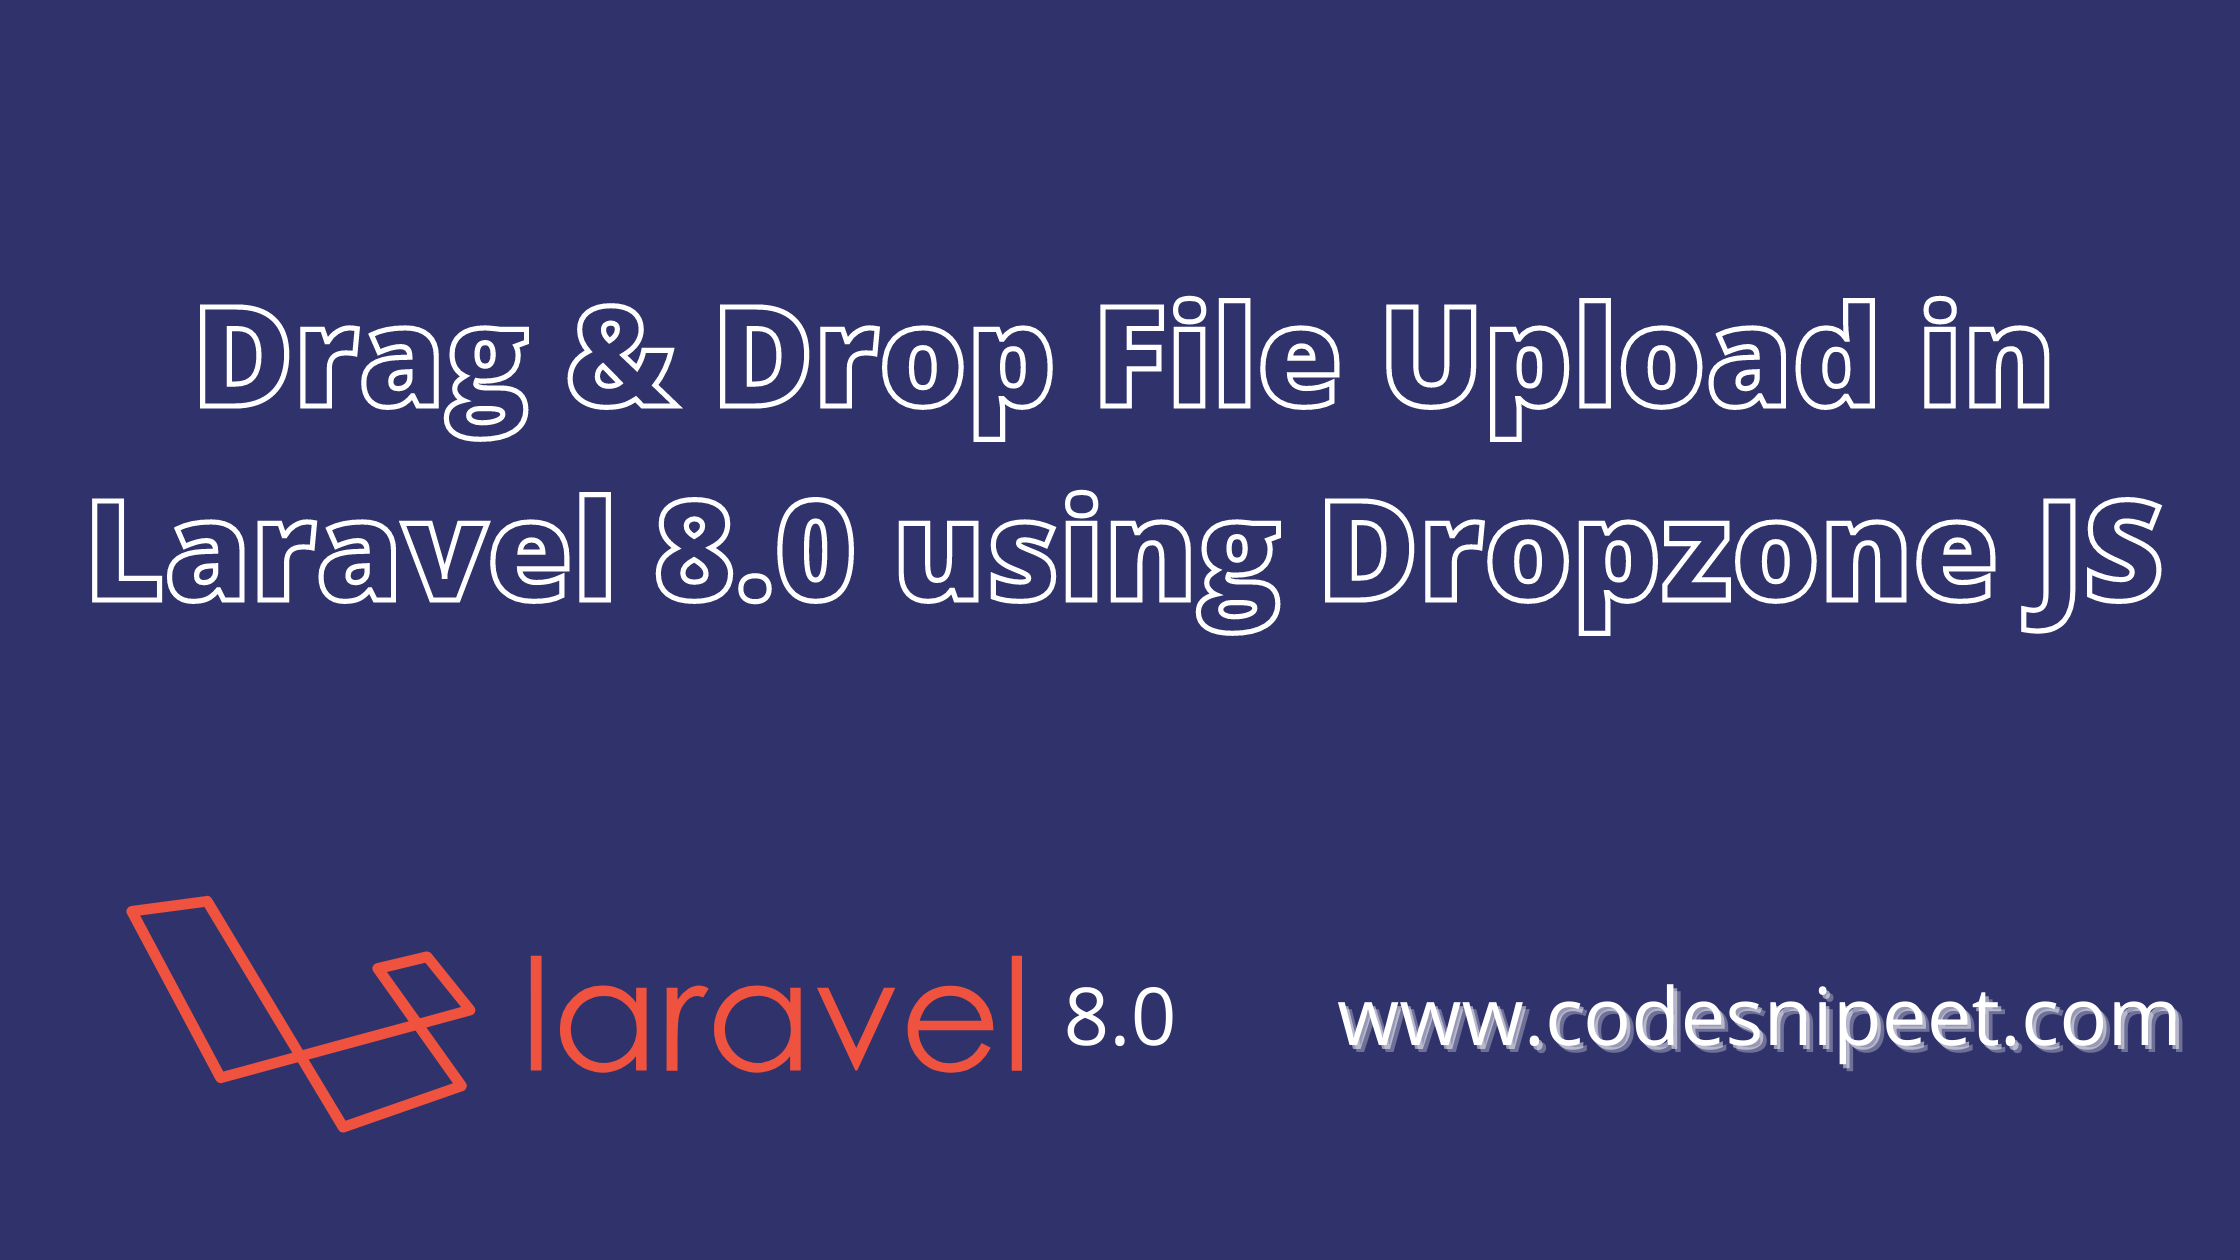 You are currently viewing Drag & Drop File Upload in Laravel 8.0 using Dropzone JS